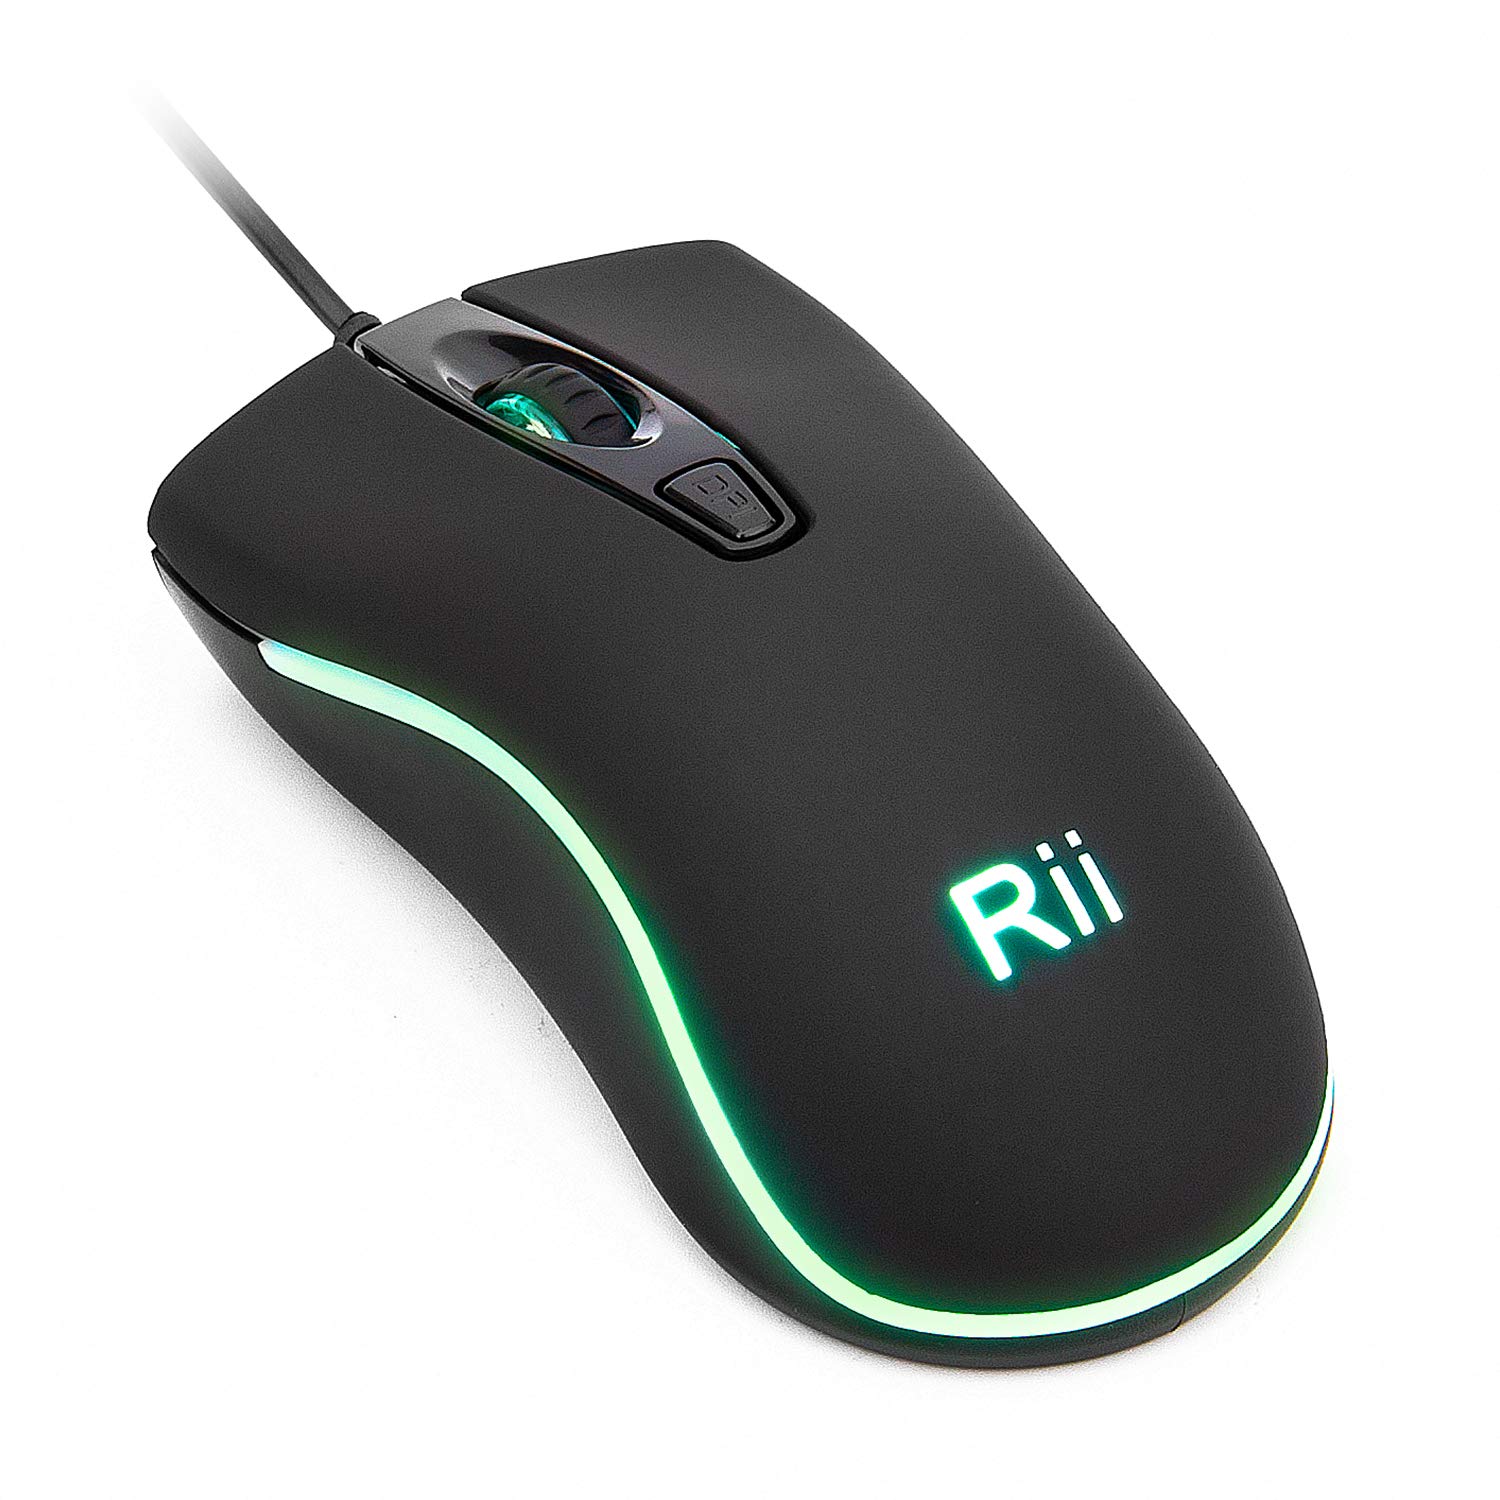 Rii Wired Mouse, RM105 USB Computer Mouse,RGB Optical 1600 DPI Office Mice for PC,Computer,Laptop,Desktop,Windows (10 Pack RGB Backlit)